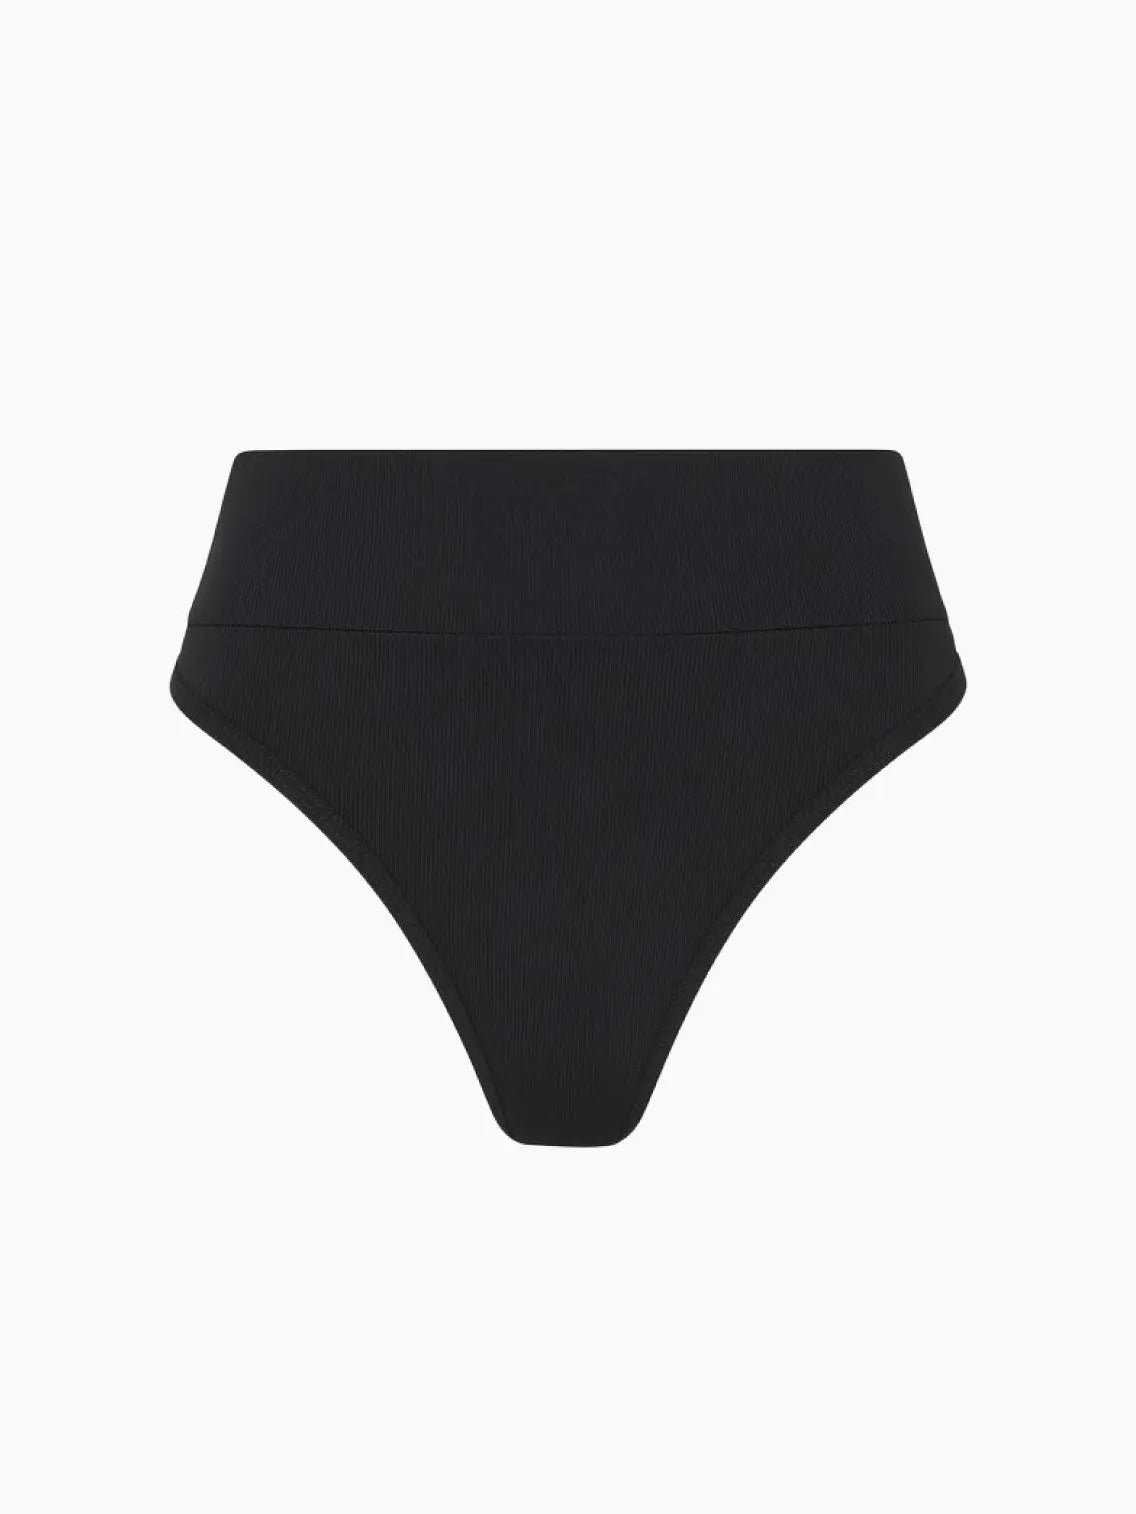 A pair of Black High Waist Brief from Innes Lauren displayed against a white background. The design features a simple, sleek silhouette with a smooth, stretchy fabric finish, providing full coverage and a classic swimwear look.